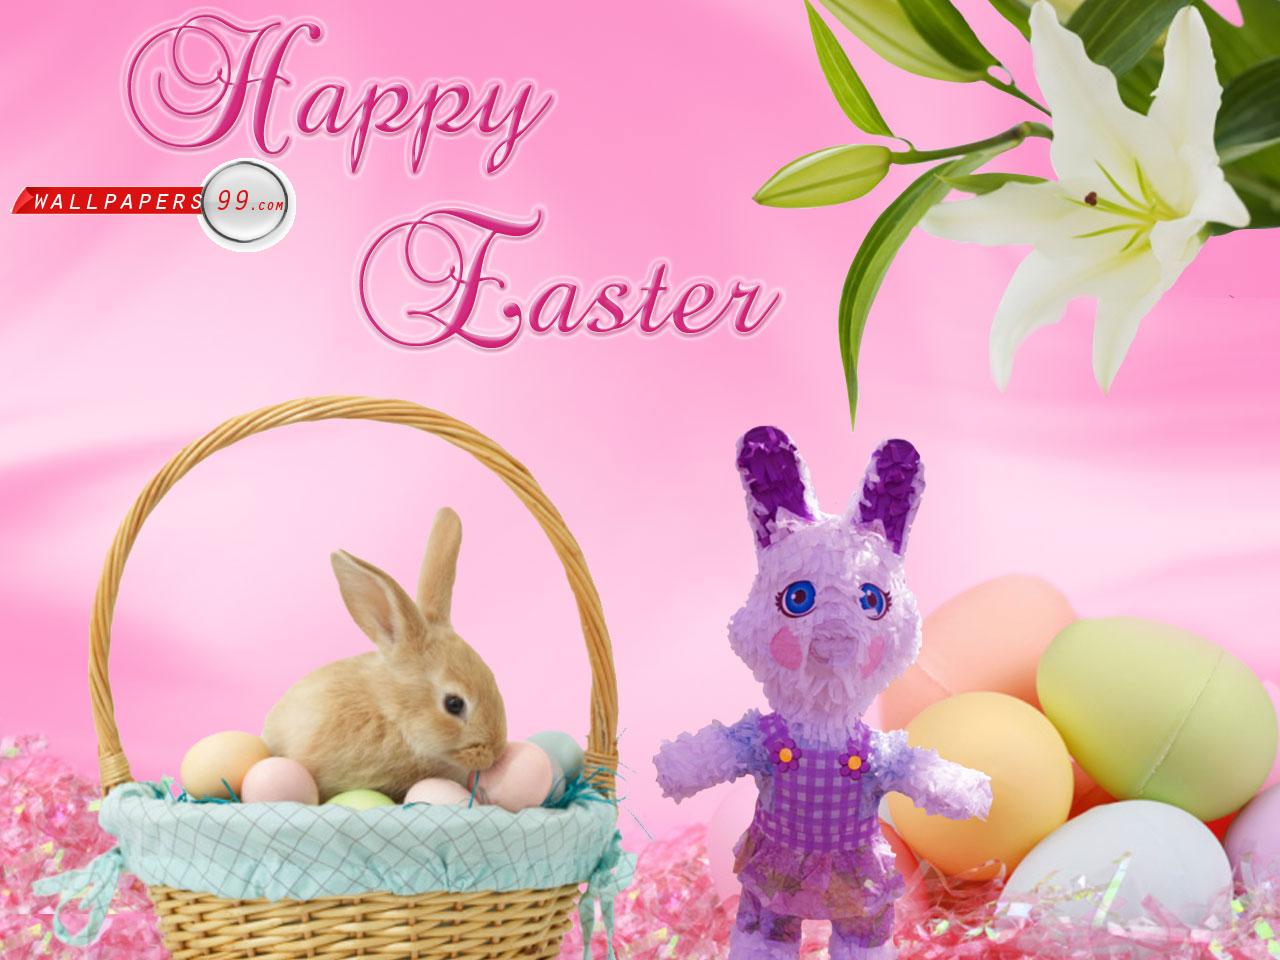 Wallpaper Happy Easter Pink Card